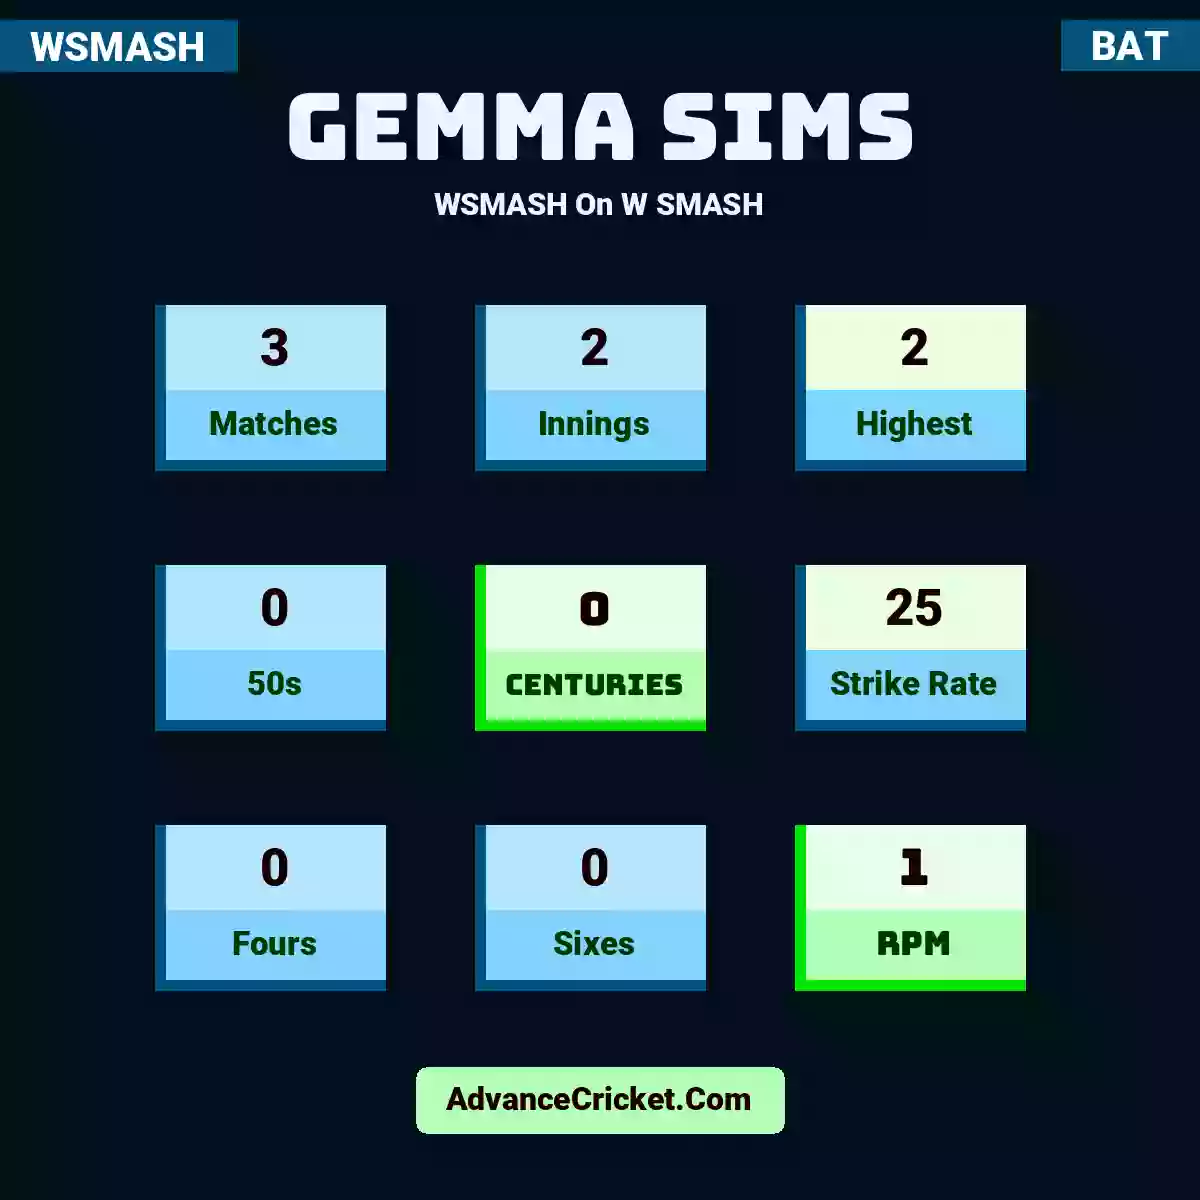 Gemma Sims WSMASH  On W SMASH, Gemma Sims played 3 matches, scored 2 runs as highest, 0 half-centuries, and 0 centuries, with a strike rate of 25. G.Sims hit 0 fours and 0 sixes, with an RPM of 1.